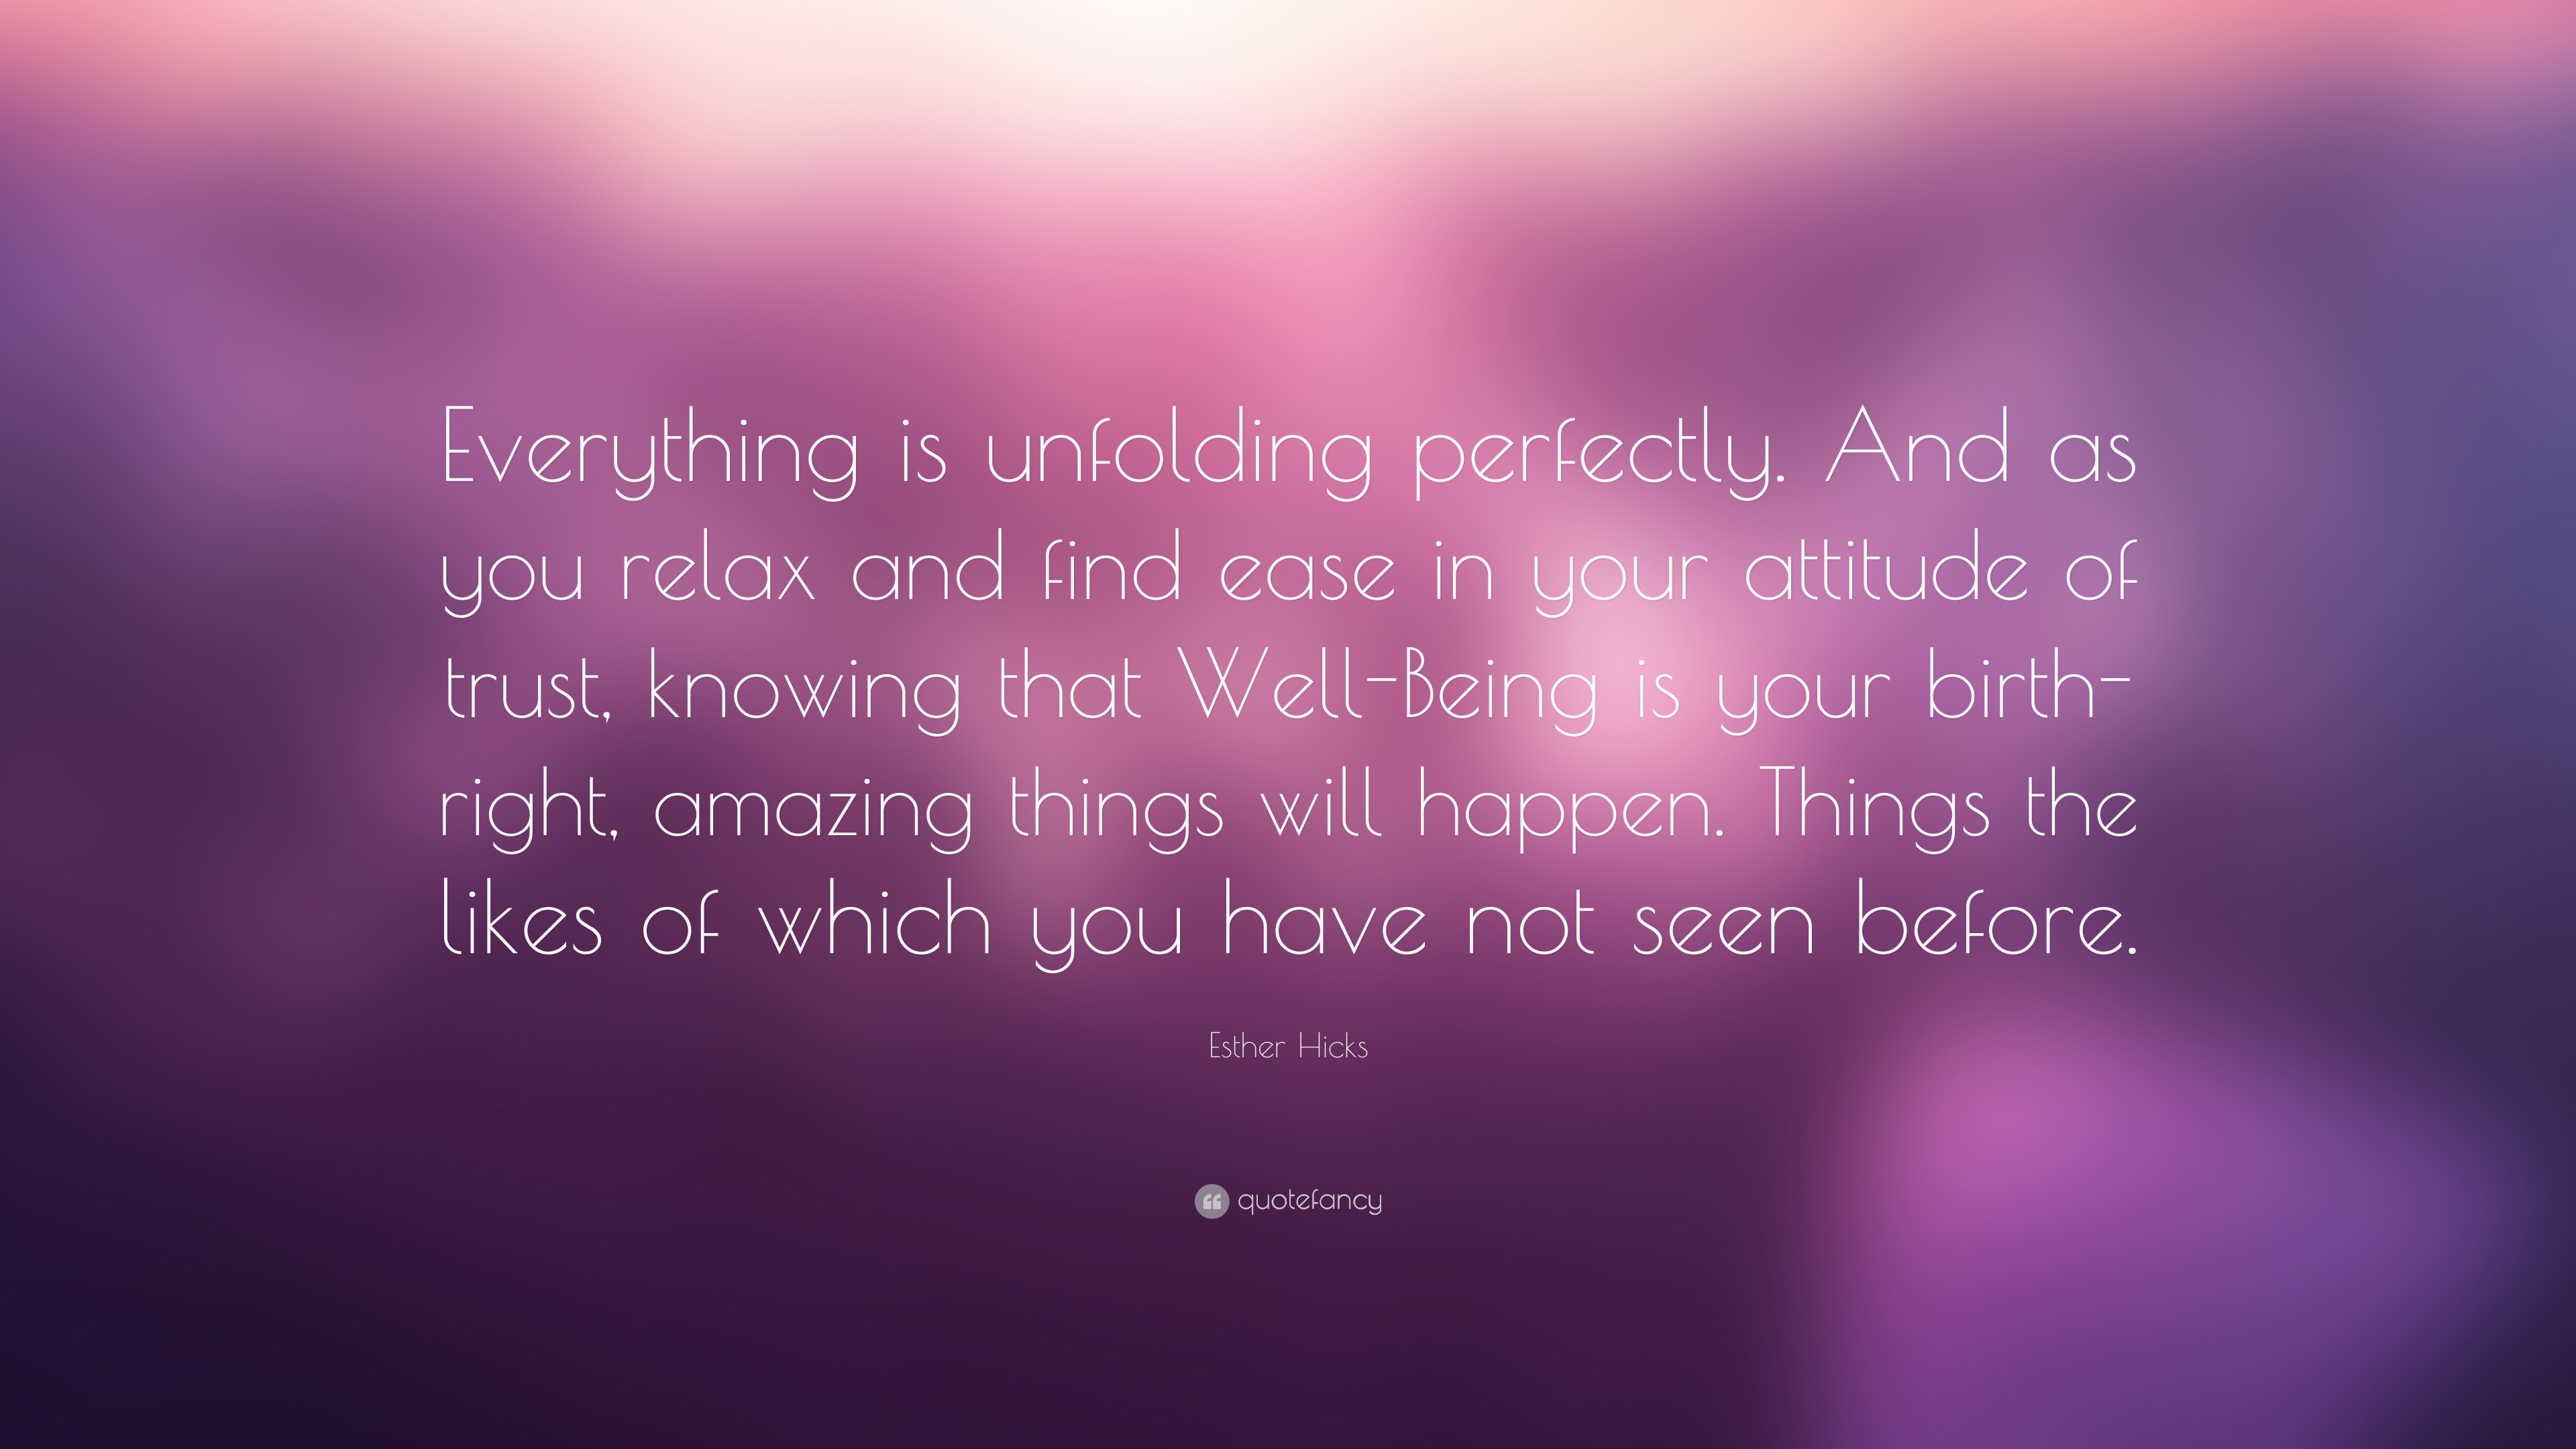 https://quotefancy.com/media/wallpaper/3840x2160/549994-Esther-Hicks-Quote-Everything-is-unfolding-perfectly-And-as-you.jpg